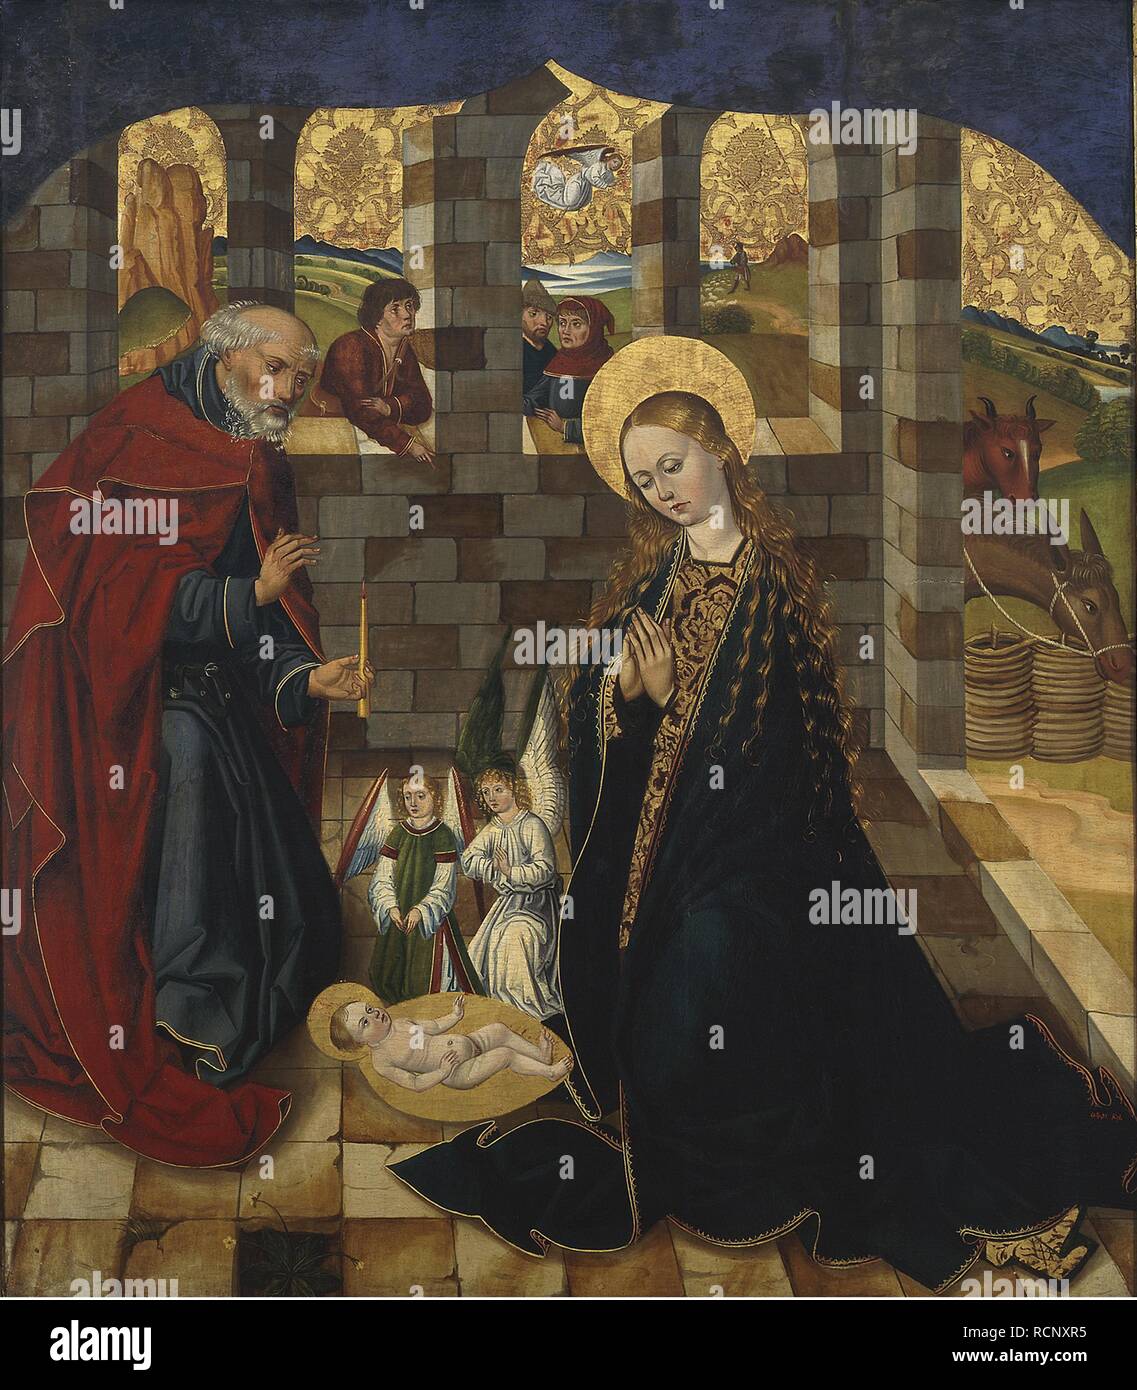 The Adoration of the Christ Child. Museum: Muzeum Narodowe, Warsaw. Author: Master of 1486-1487. Stock Photo